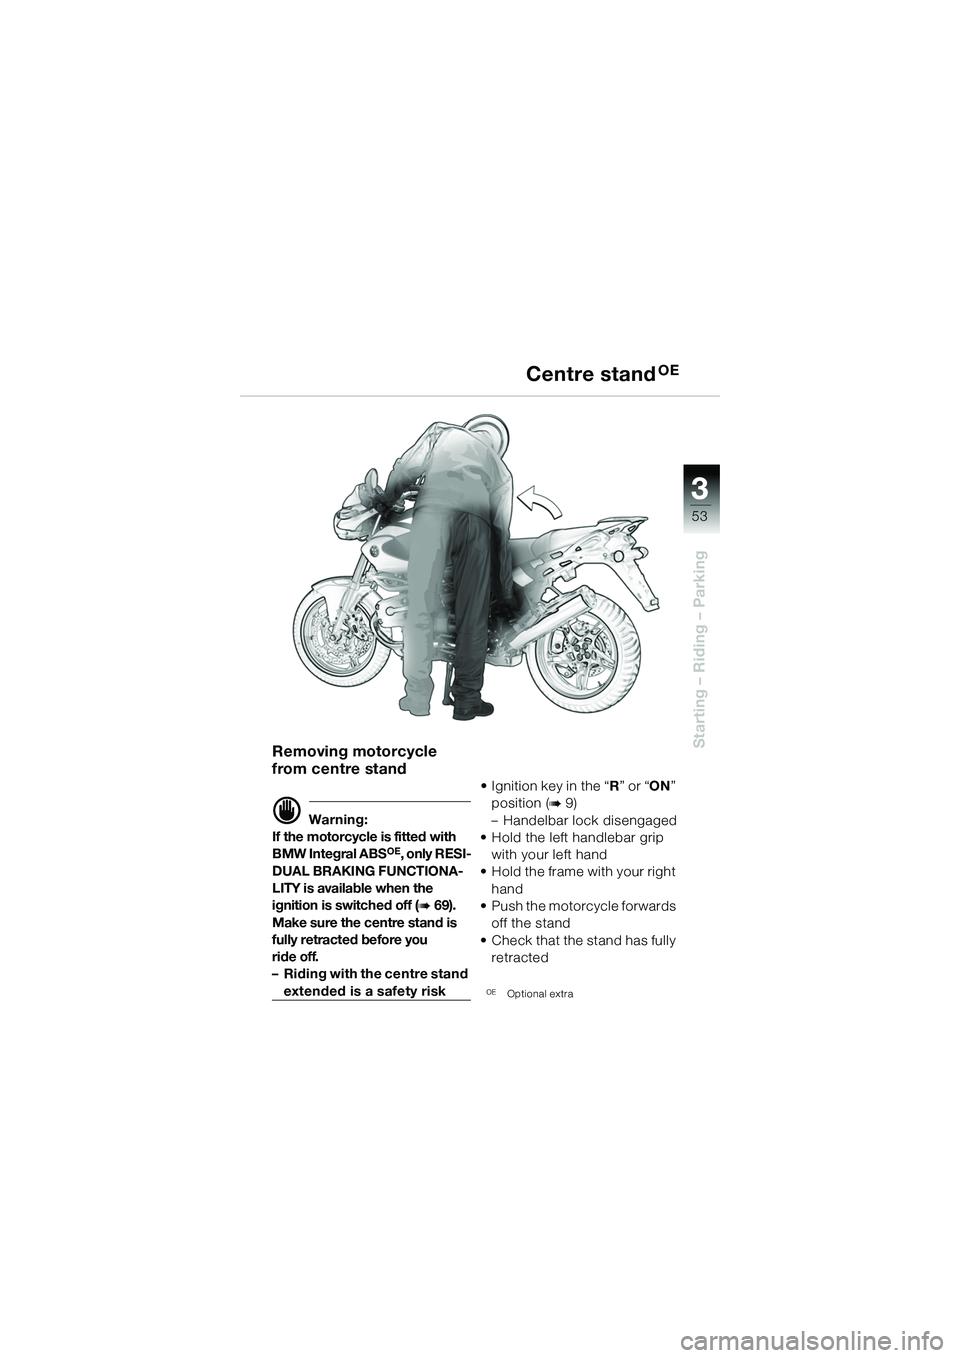 BMW MOTORRAD R 1150 R 2002  Riders Manual (in English) 3
53
3
Starting – Riding – Parking
Centre standOE
Removing motorcycle 
from centre stand
d Warning:
If the motorcycle is fitted with 
BMW Integral ABS
OE, only RESI-
DUAL BRAKING FUNCTIONA-
LITY i